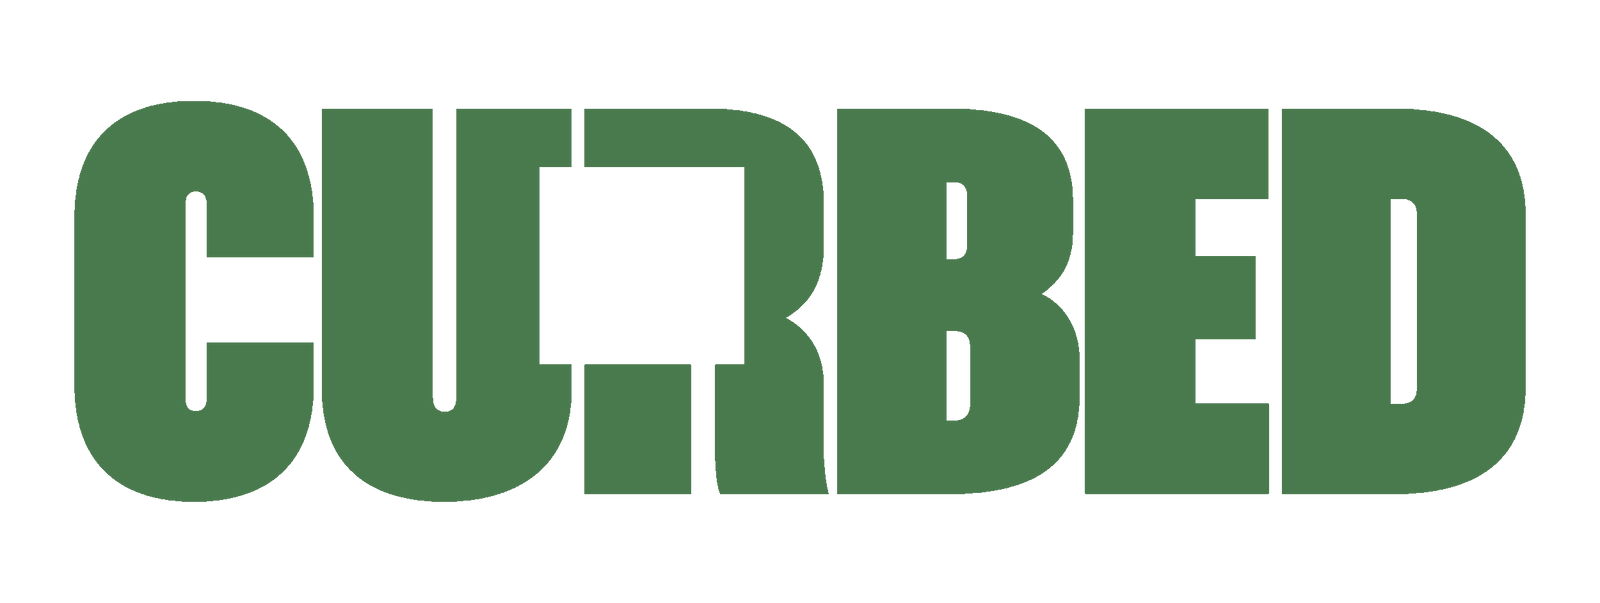 Curbed New York Logo